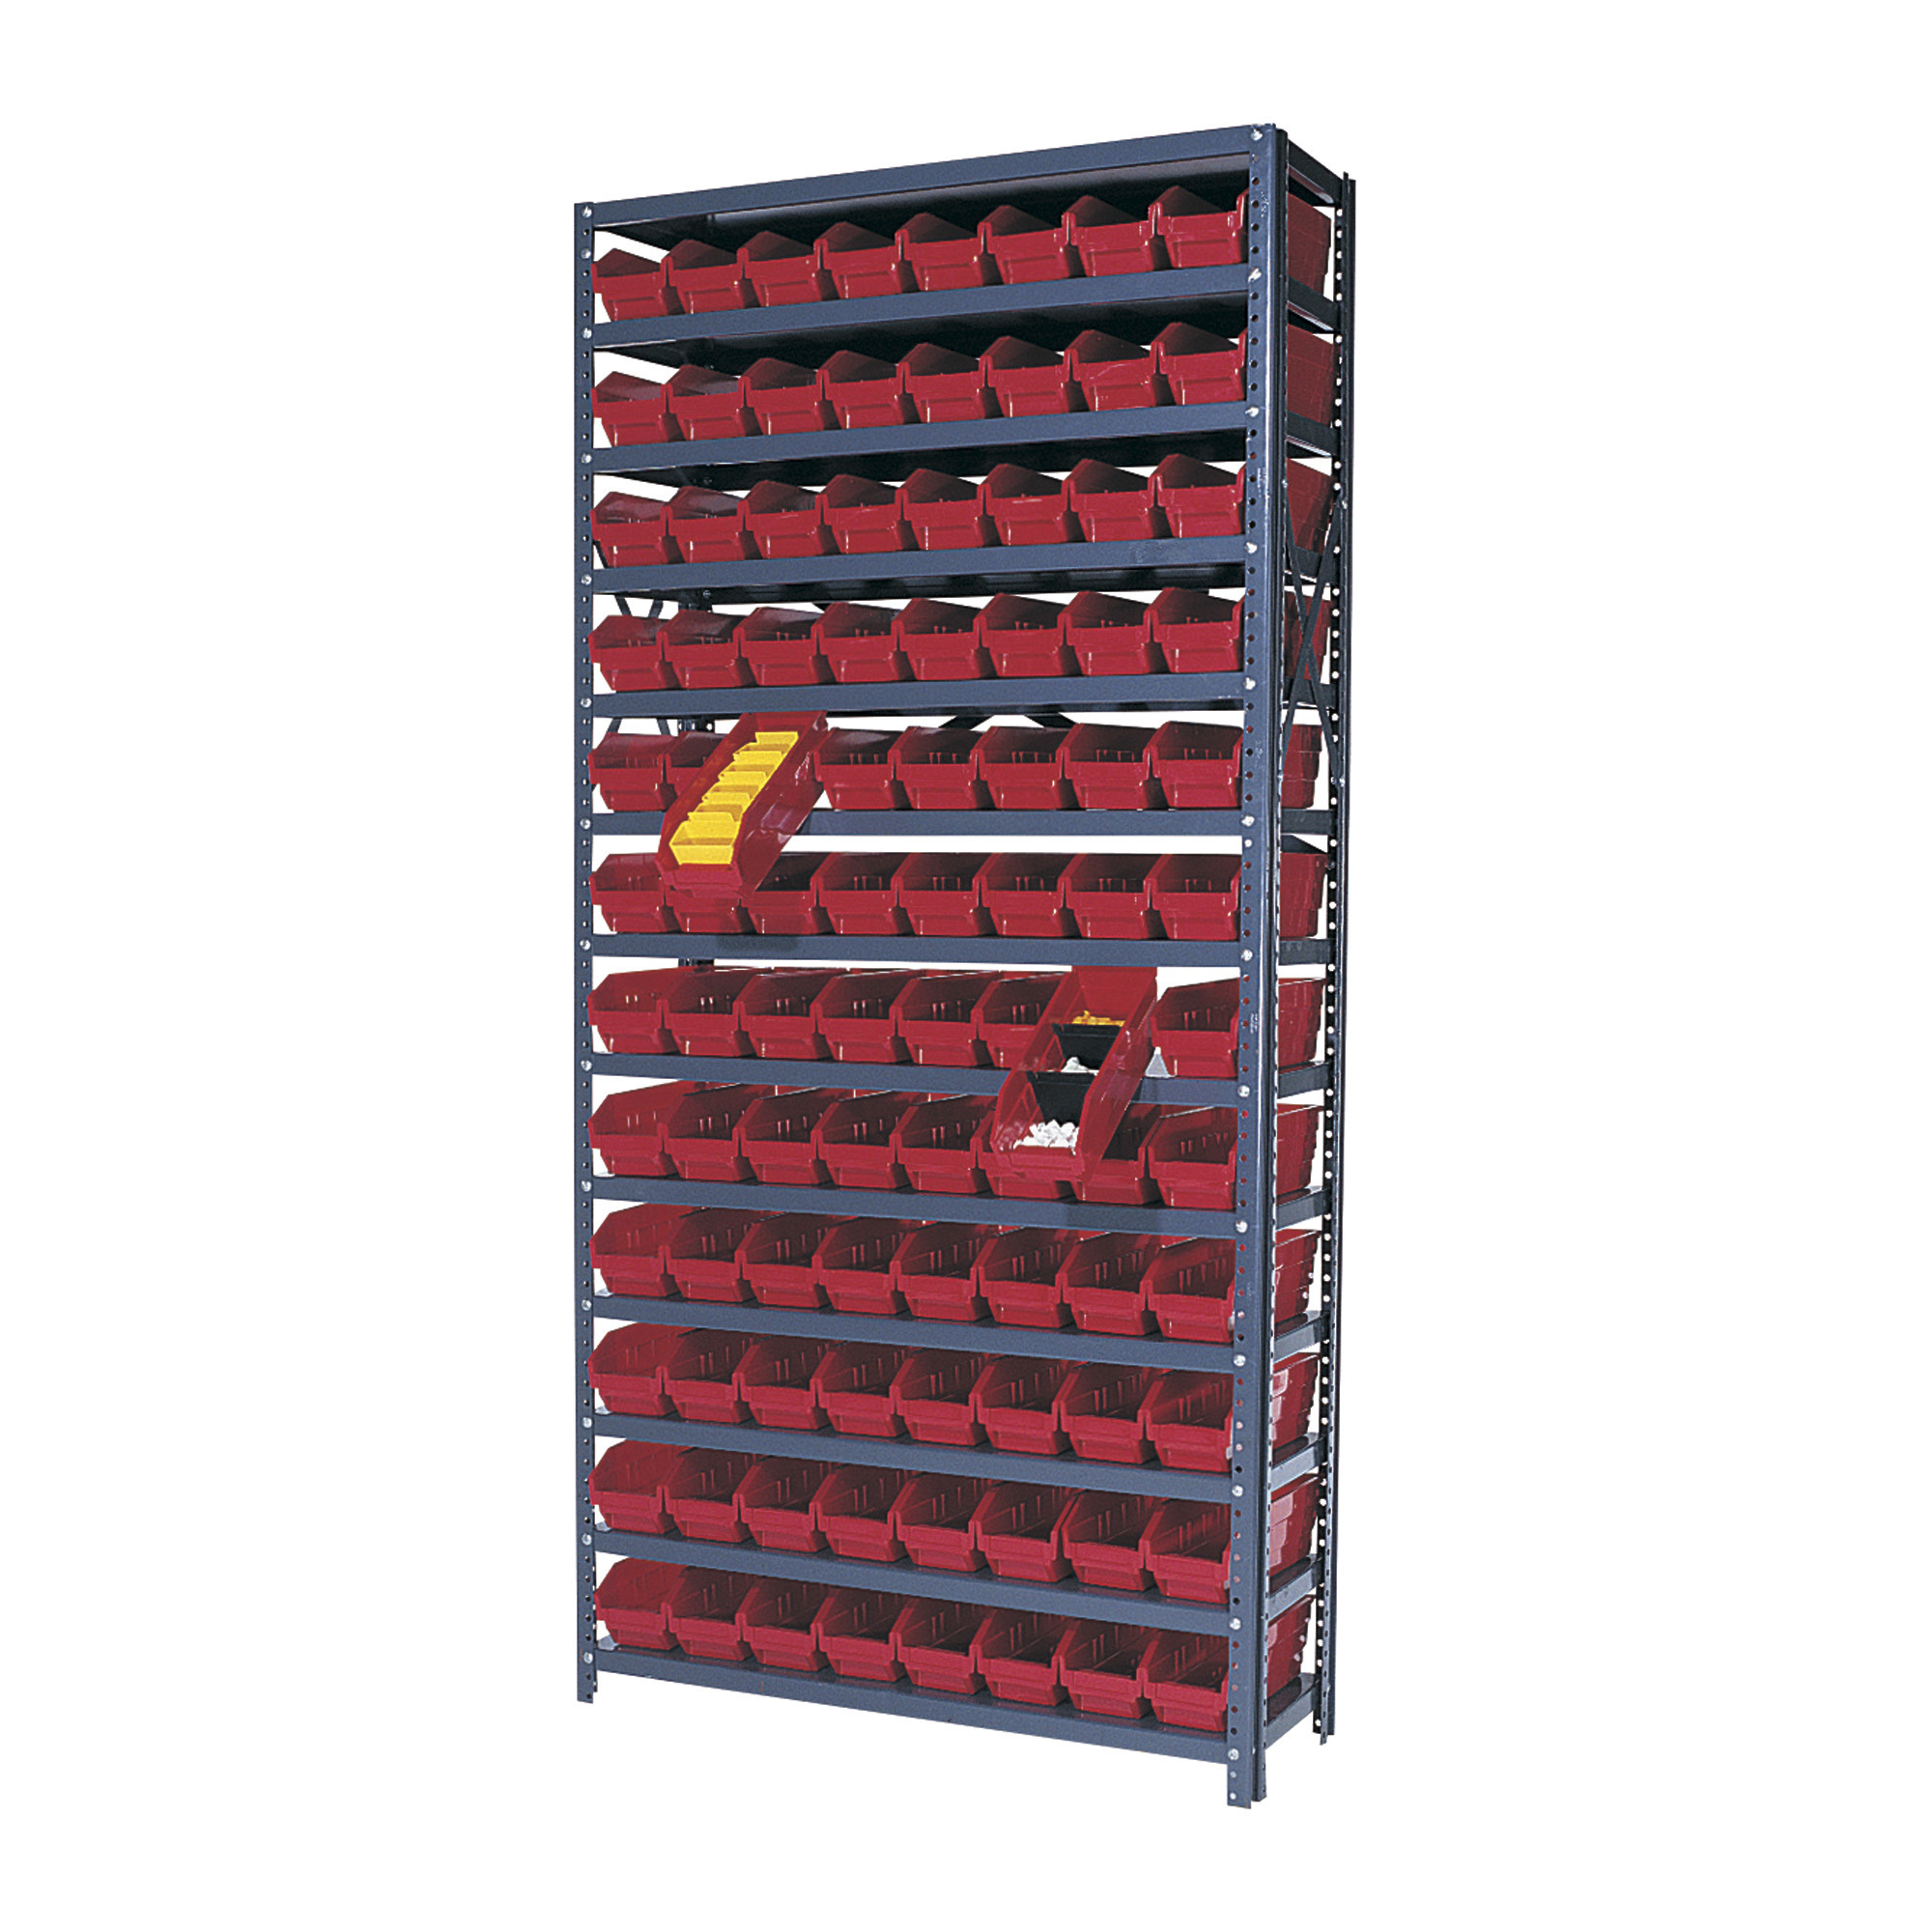 Quantum Storage Single Side Metal Shelving Unit With 96 Bins, 12Inch x 36Inch x 75Inch Rack Size, Red, Model 1275-101RD